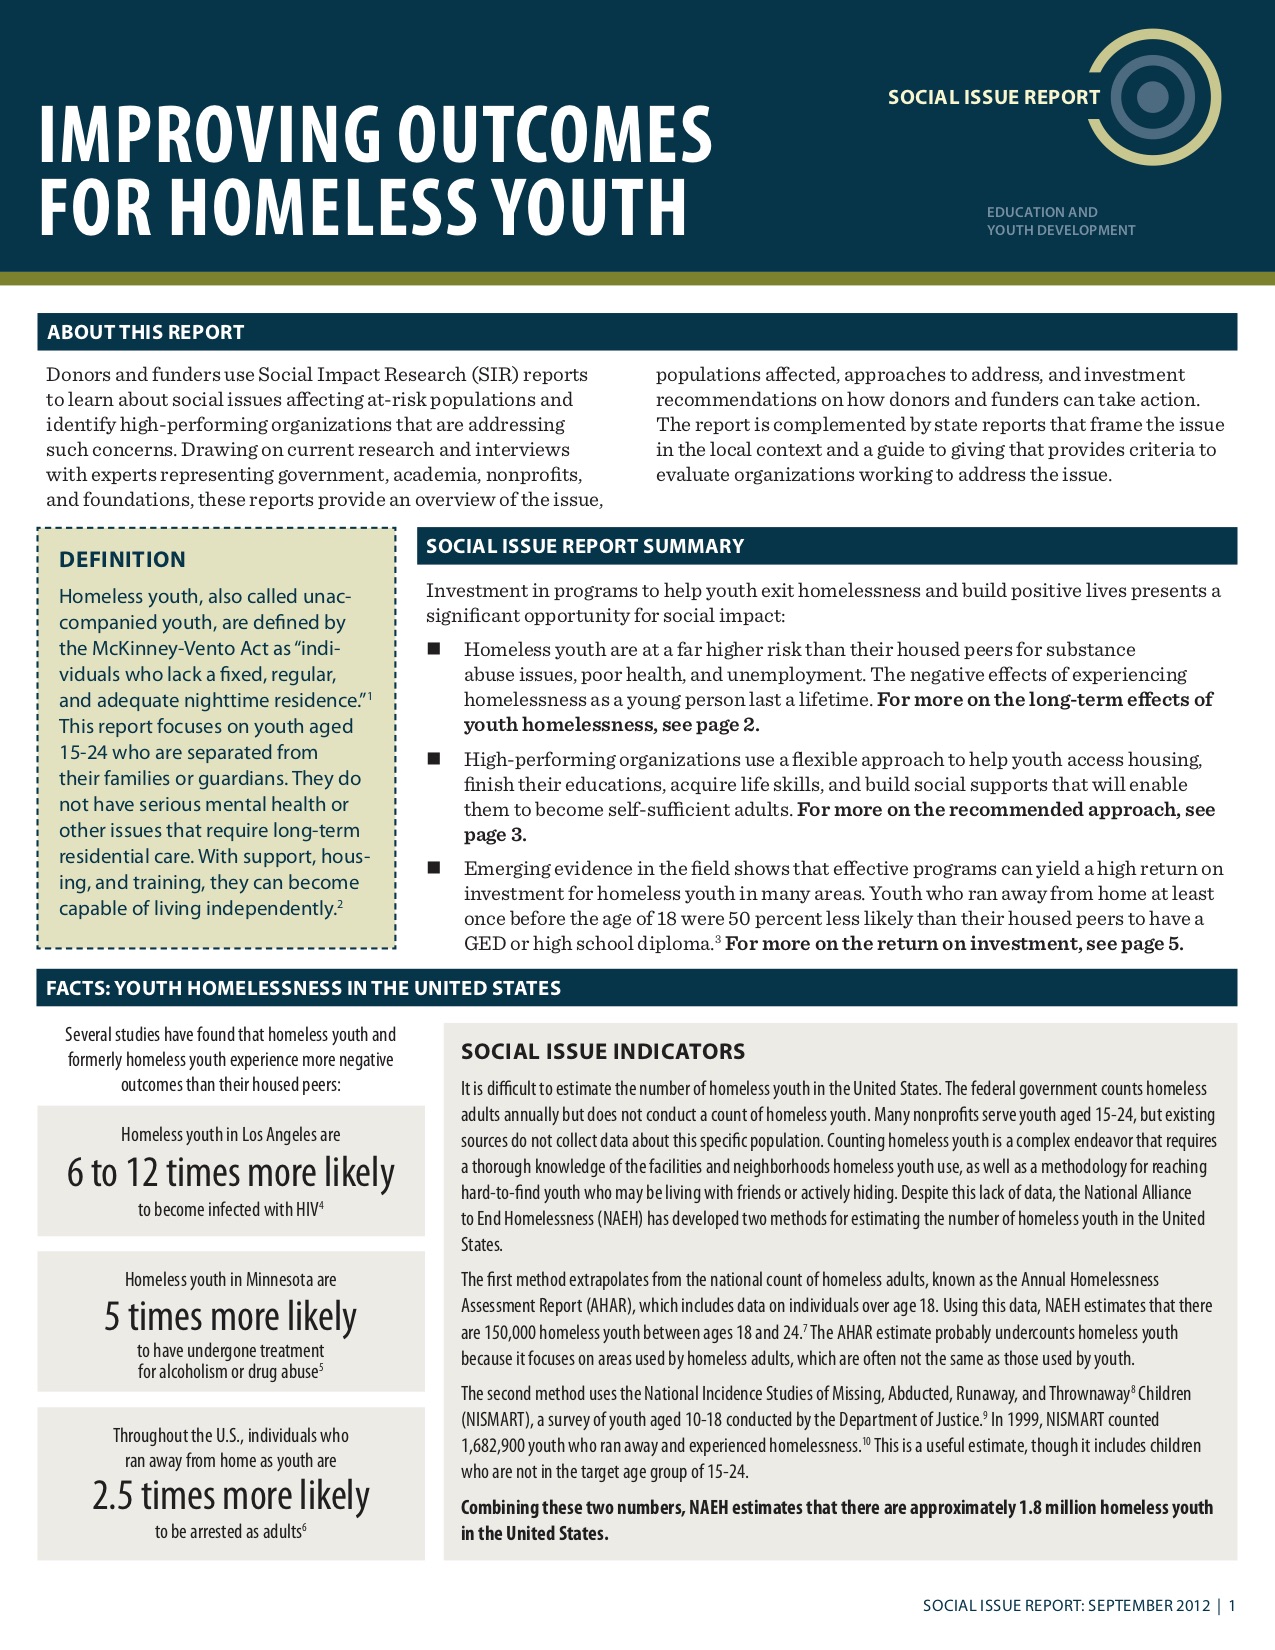 Improving Outcomes for Homeless Youth: Social Issue Report